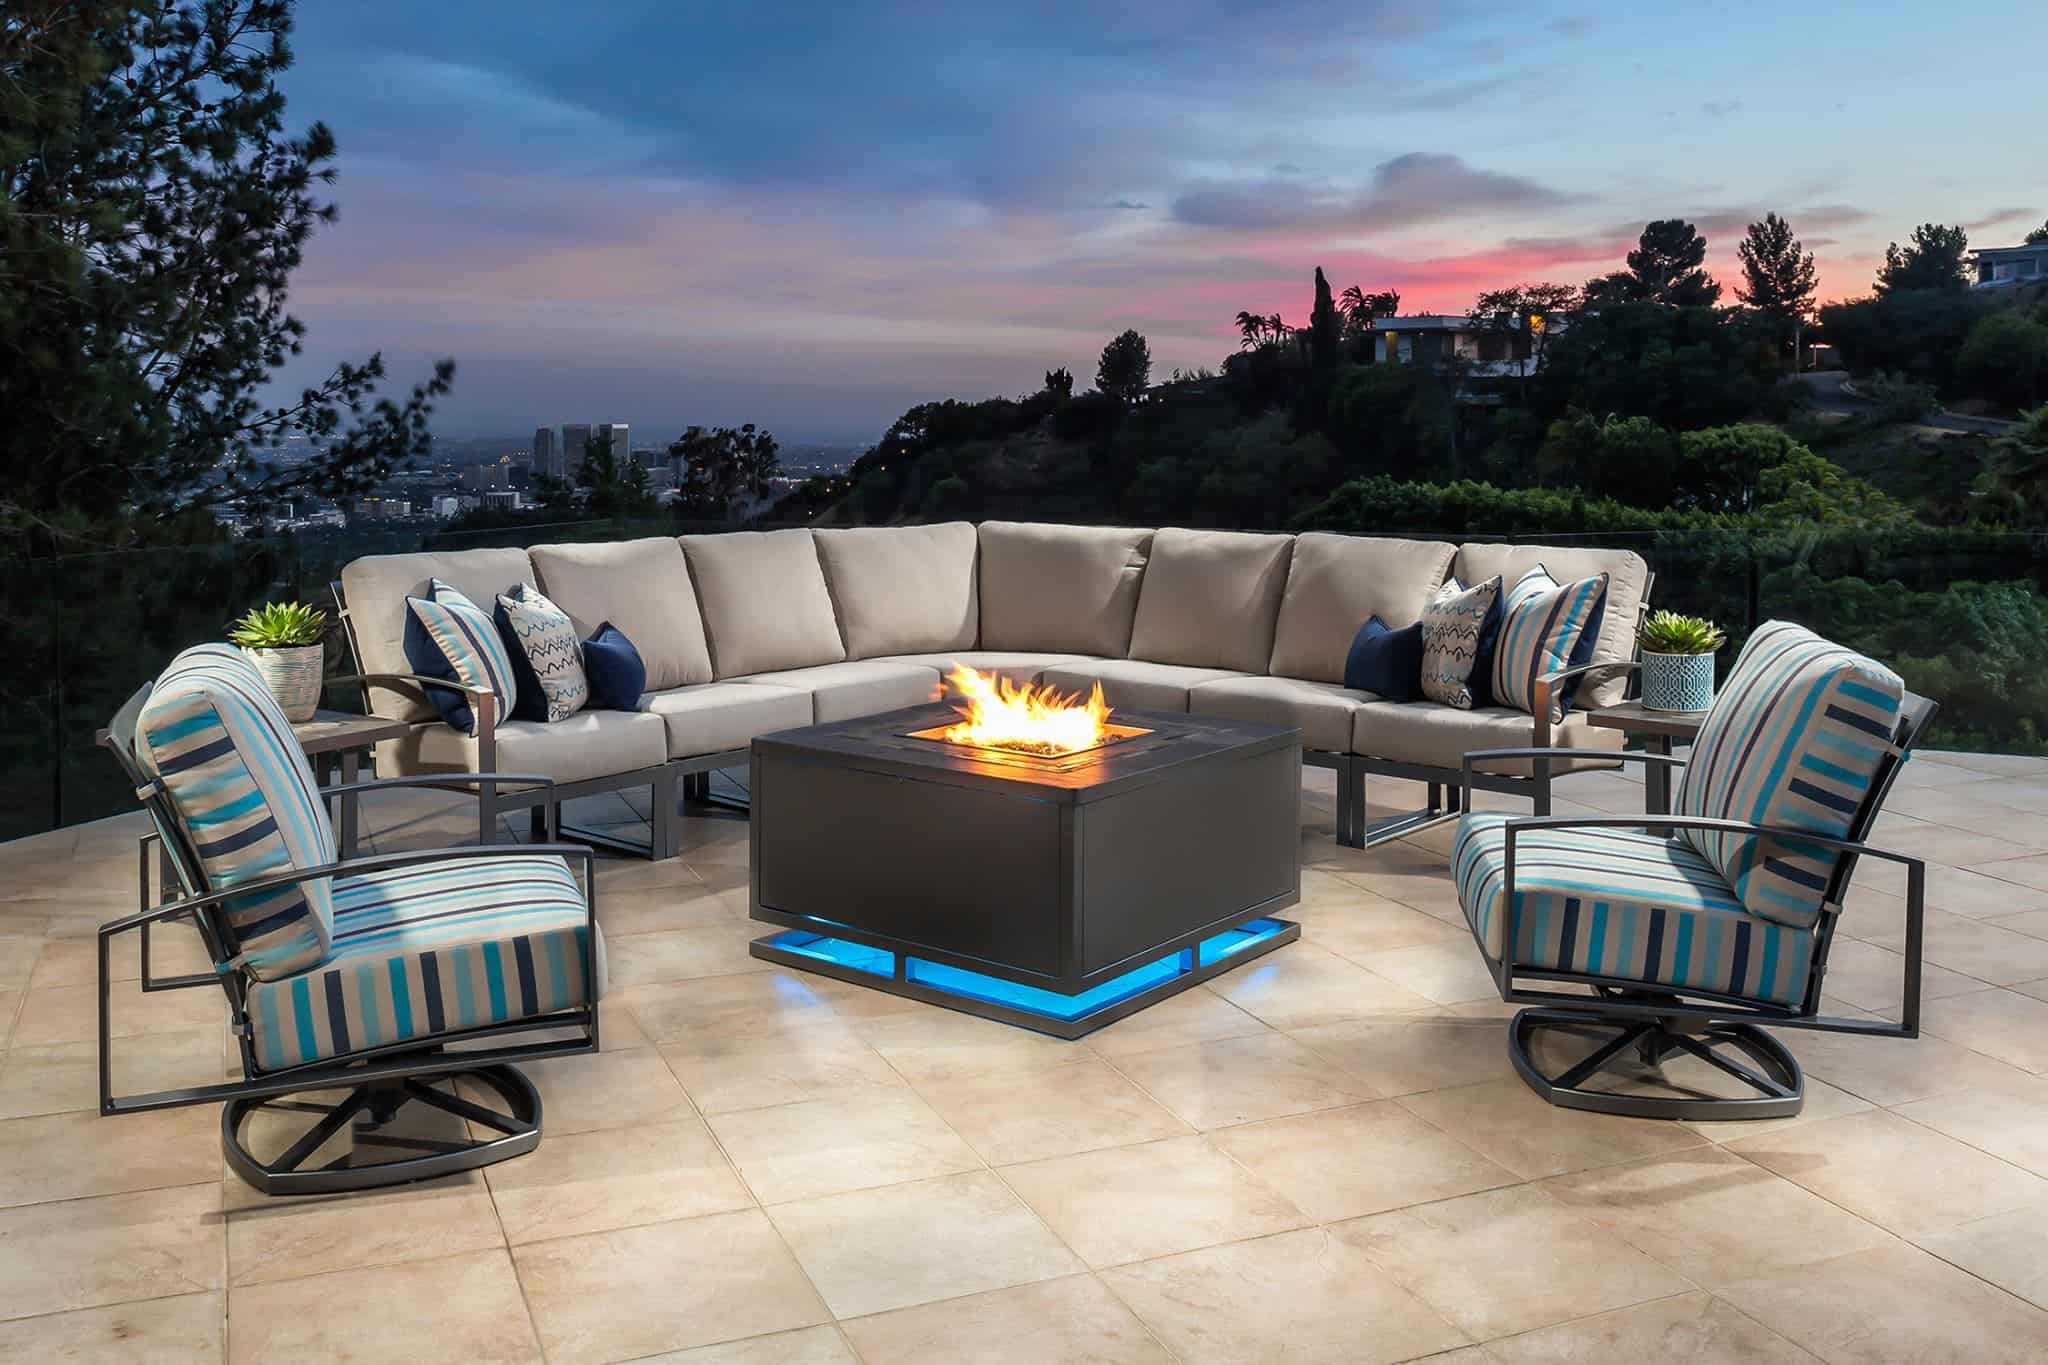 Patio Furniture Trends that Makes You Want to Take It Outside